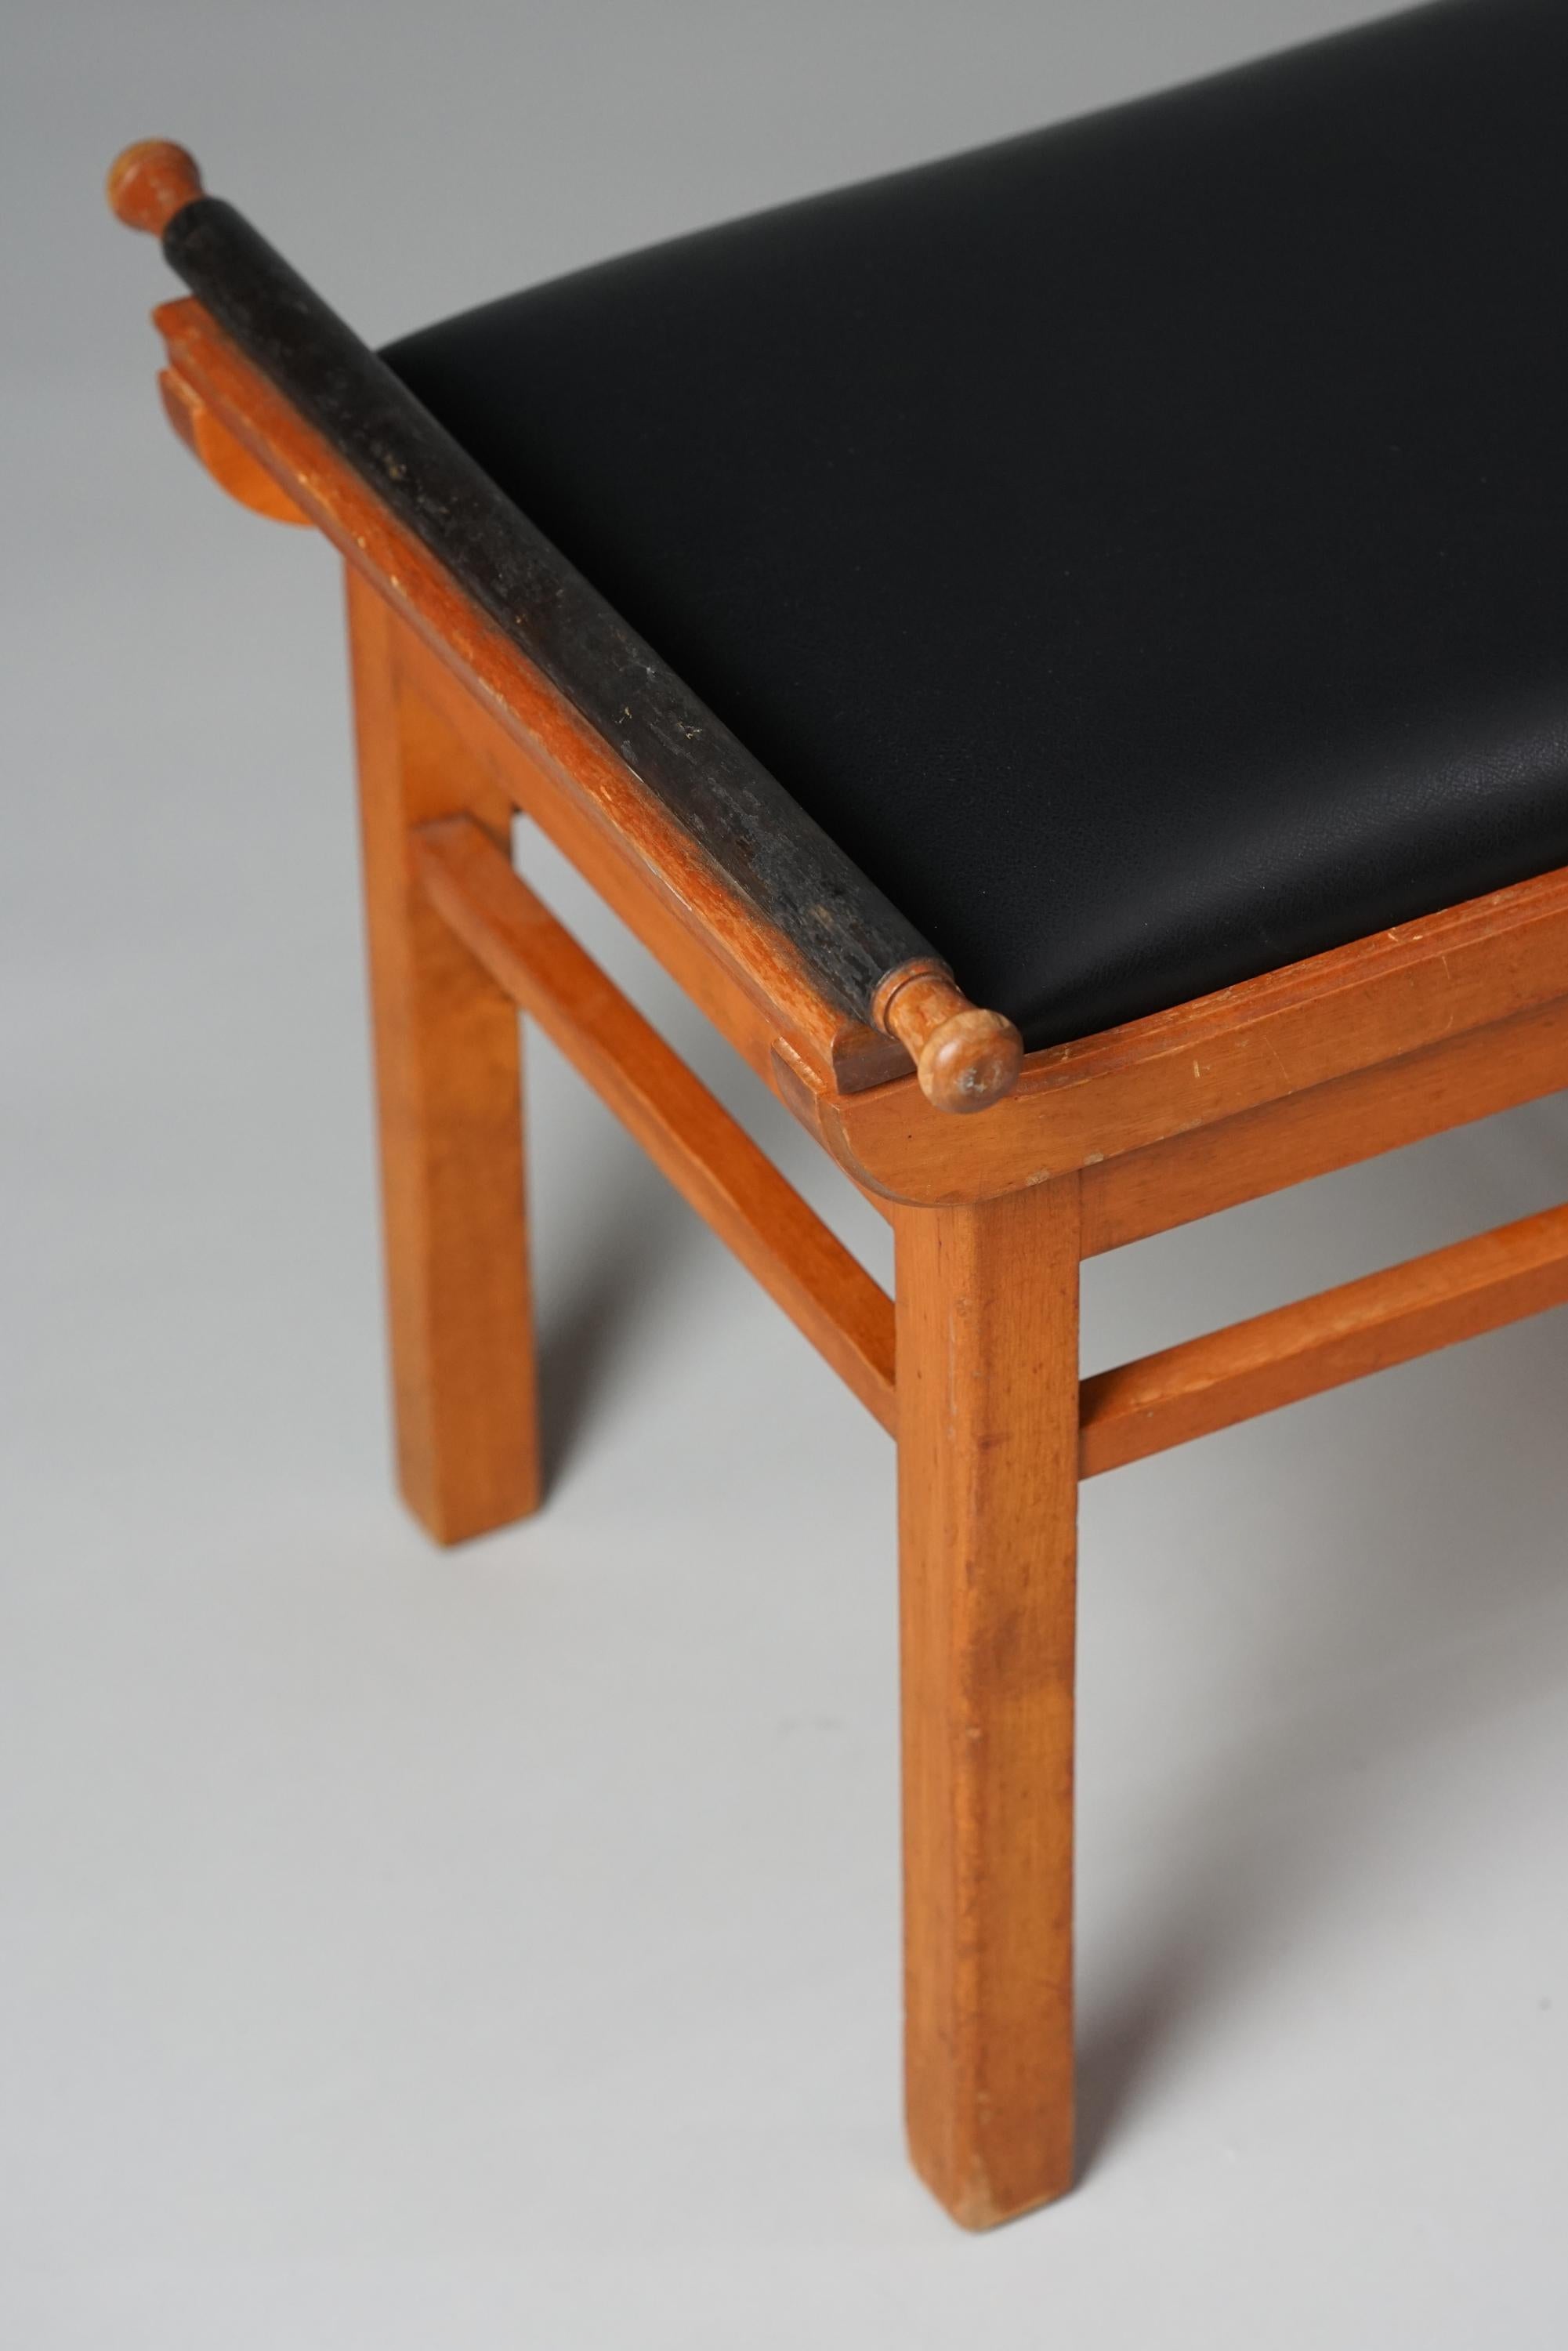 Footstool, attributed to Birger Hahl, early 20th century. Birch frame with reupholstered leather seating. Good vintage condition, minor patina consistent with age and use. 
